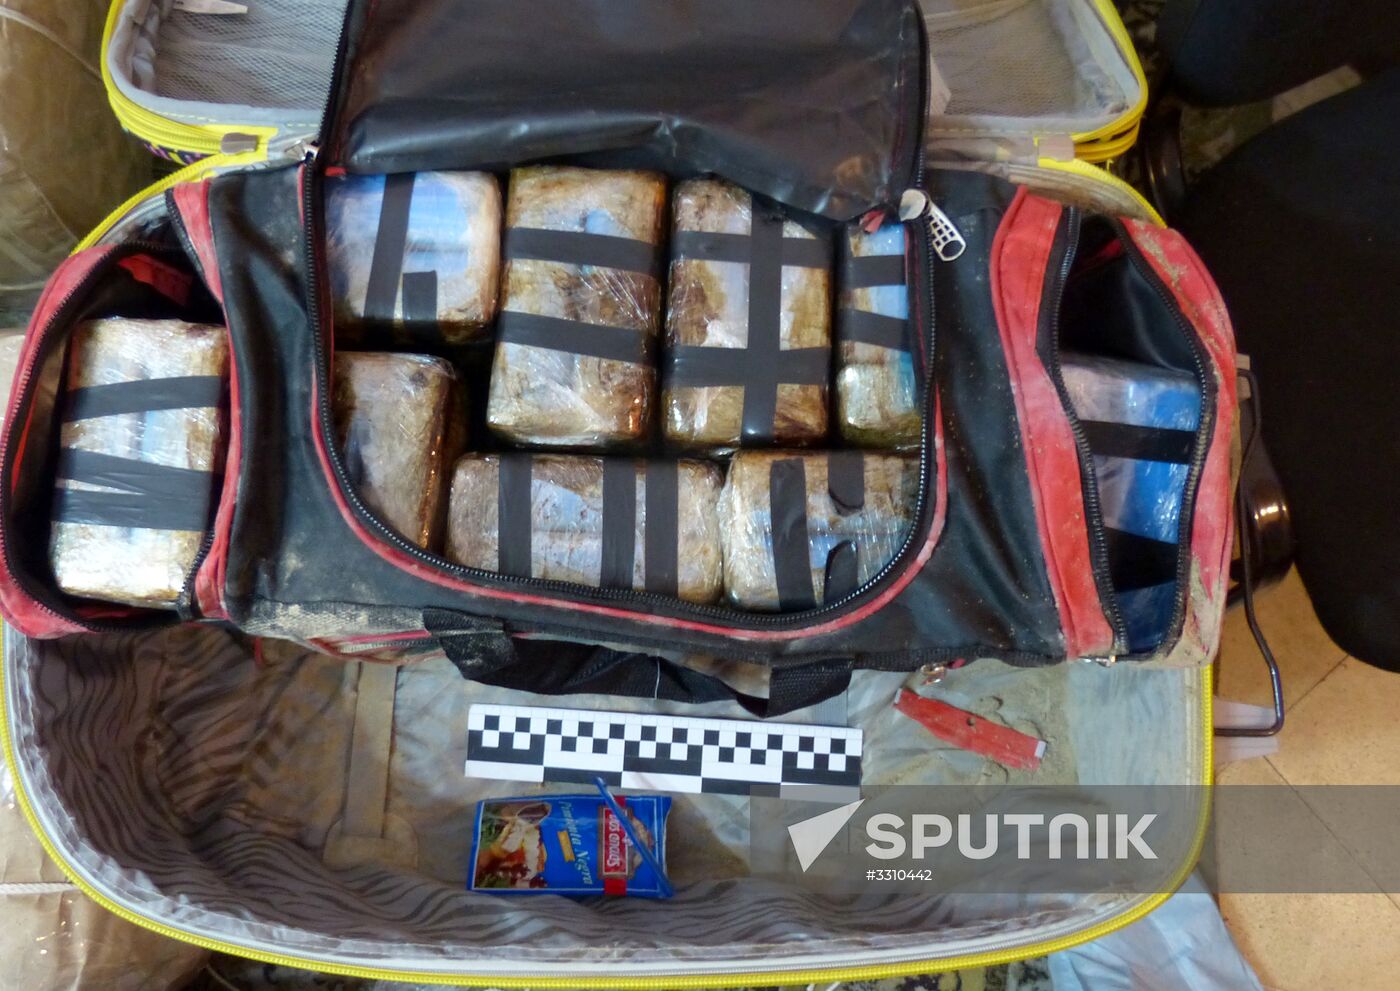 Russian, Argentian special services disclose operation to foil cocaine trafficking